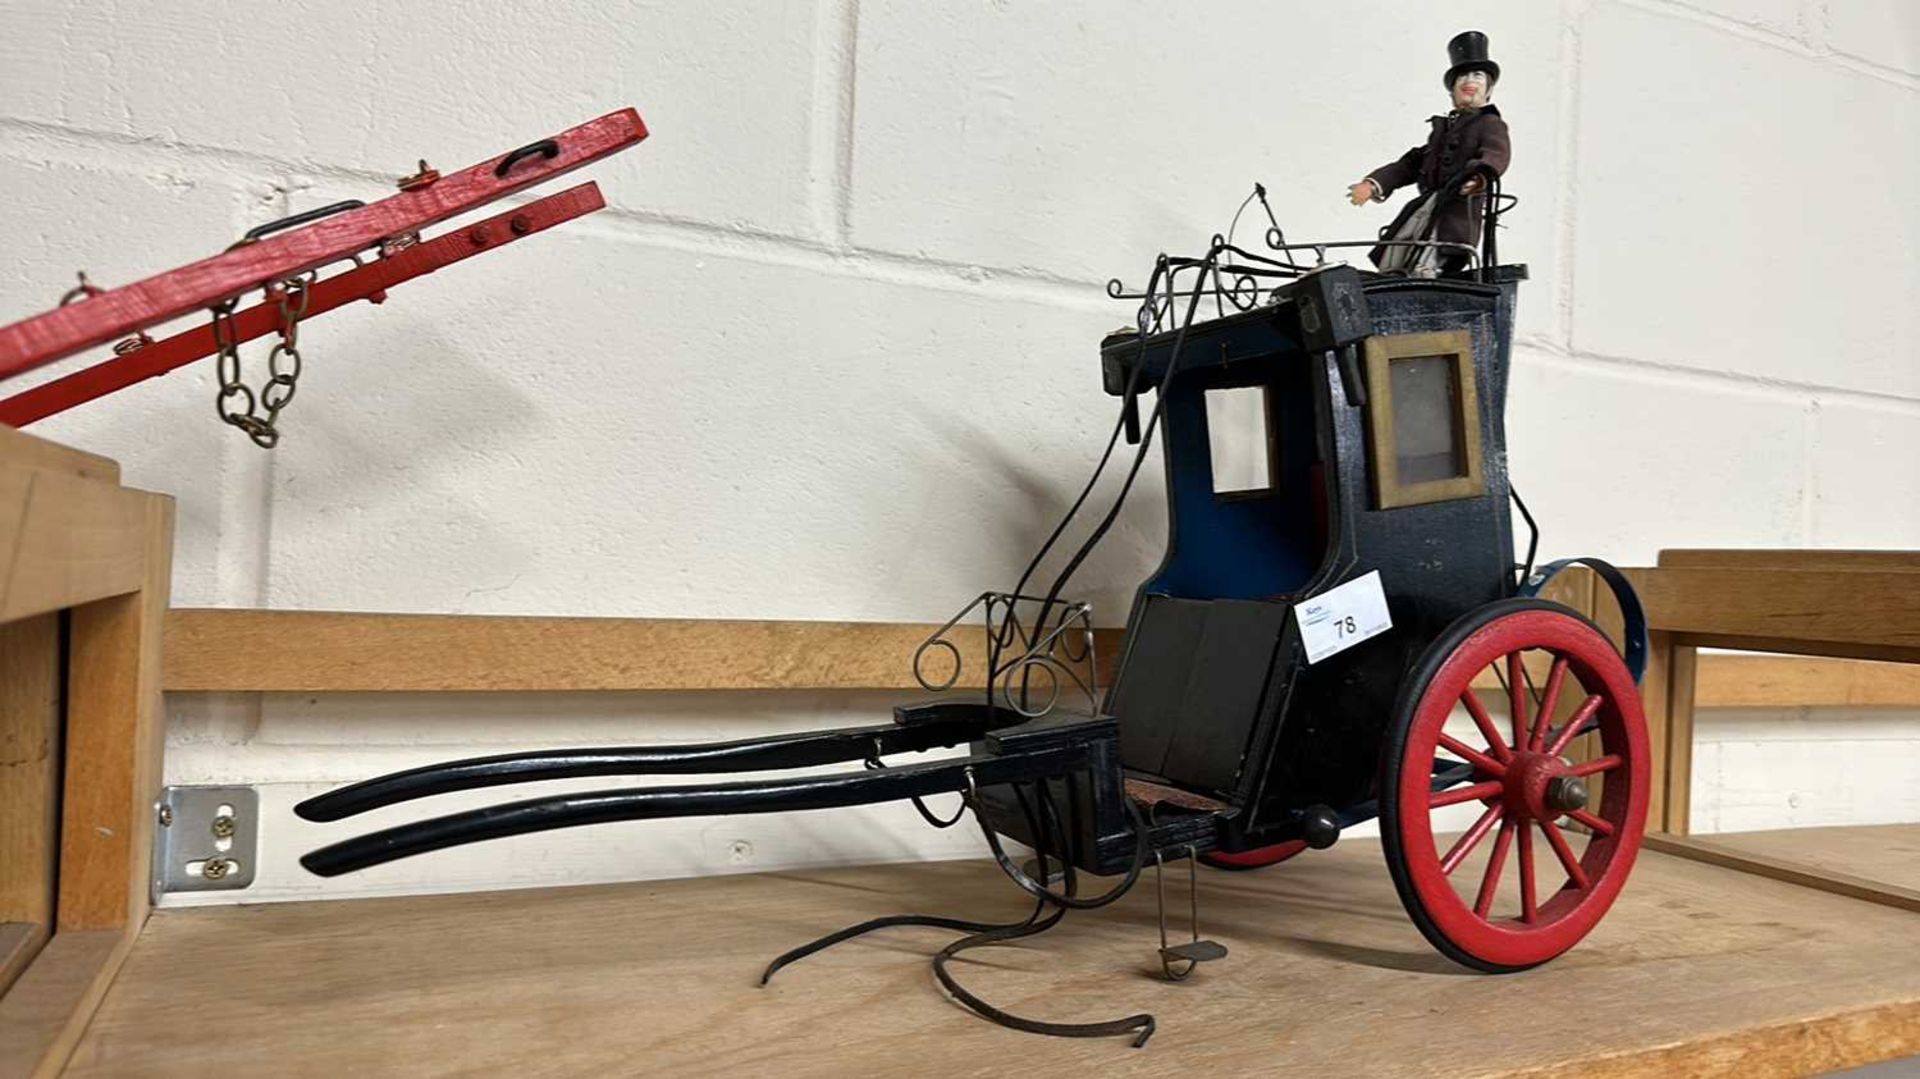 A scratch built model of a Victorian carriage painted in black with red wheels together with a